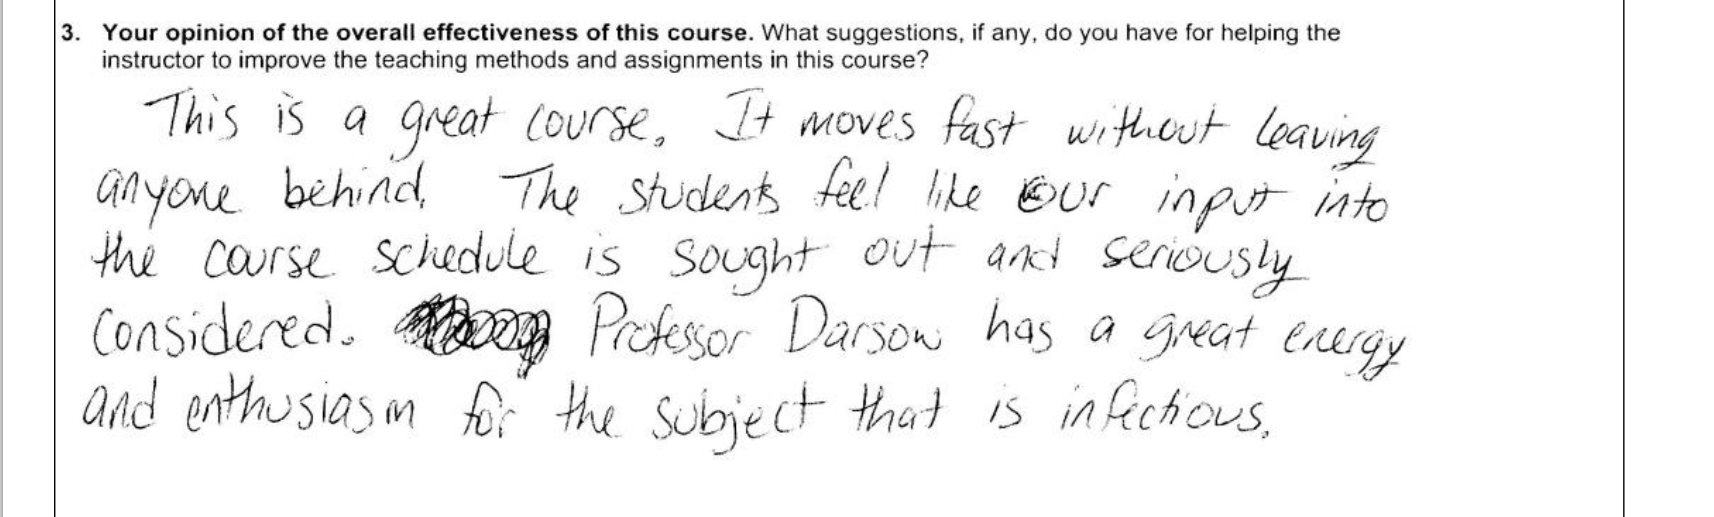 student opinion survey feedback annotation